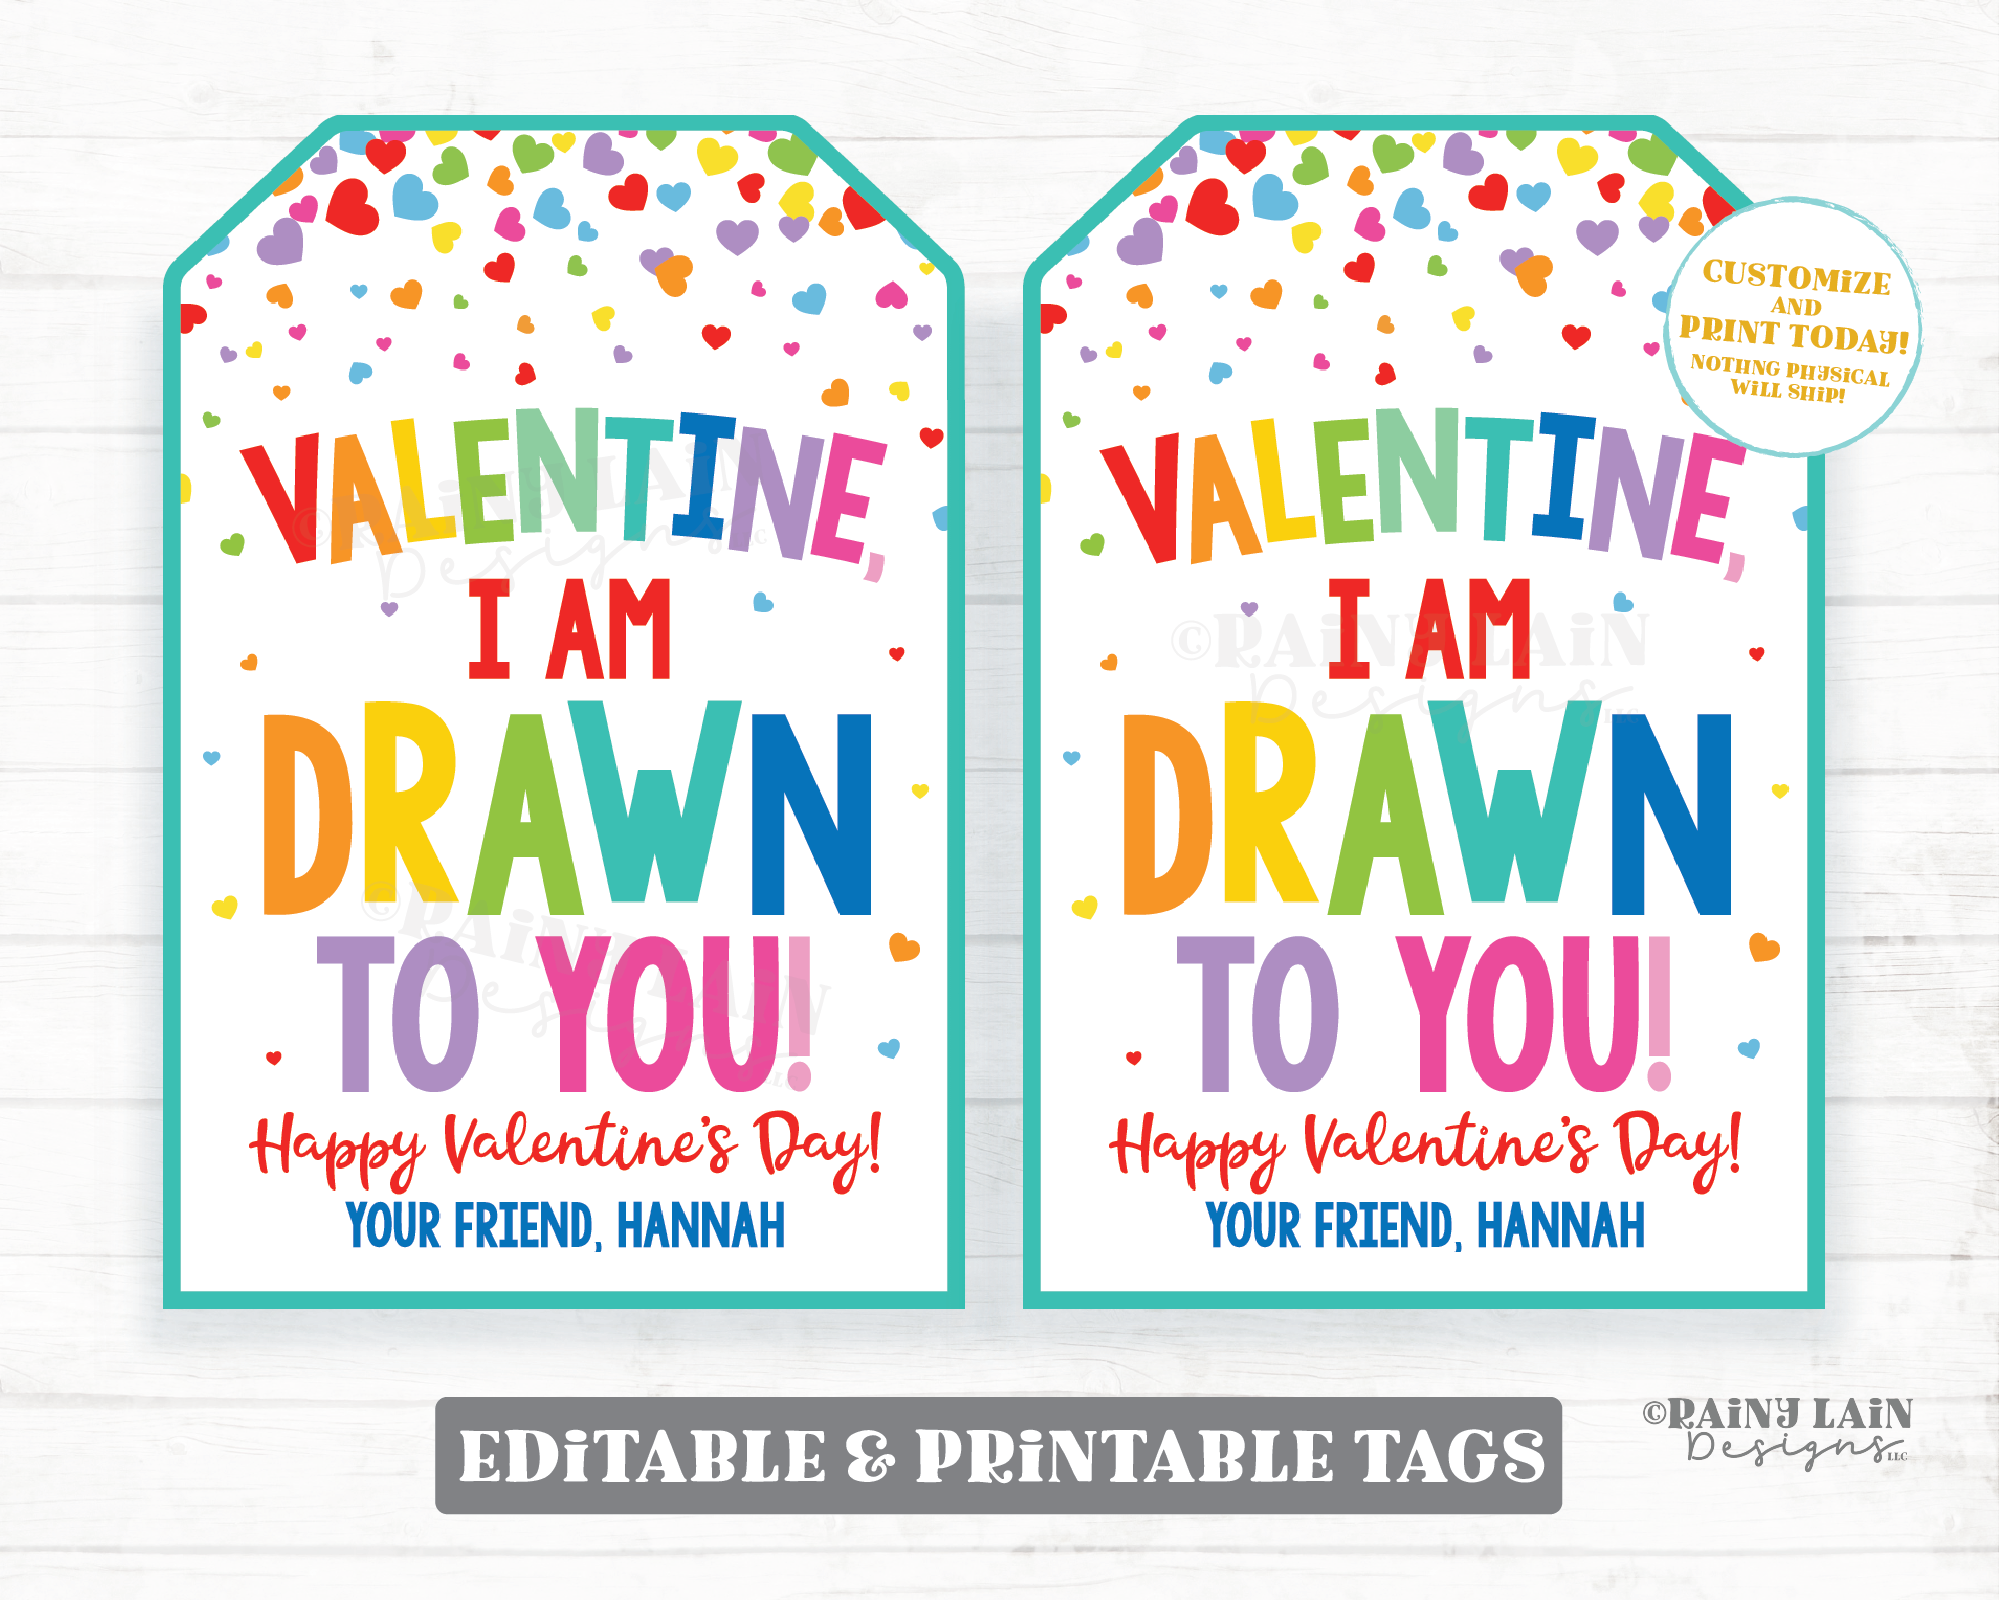 Valentine I'm Drawn To You Tag Mini Sketch Game Drawing Pad Valentine's Day Gift Preschool Classroom Printable Kids Non-Candy Valentine Tag